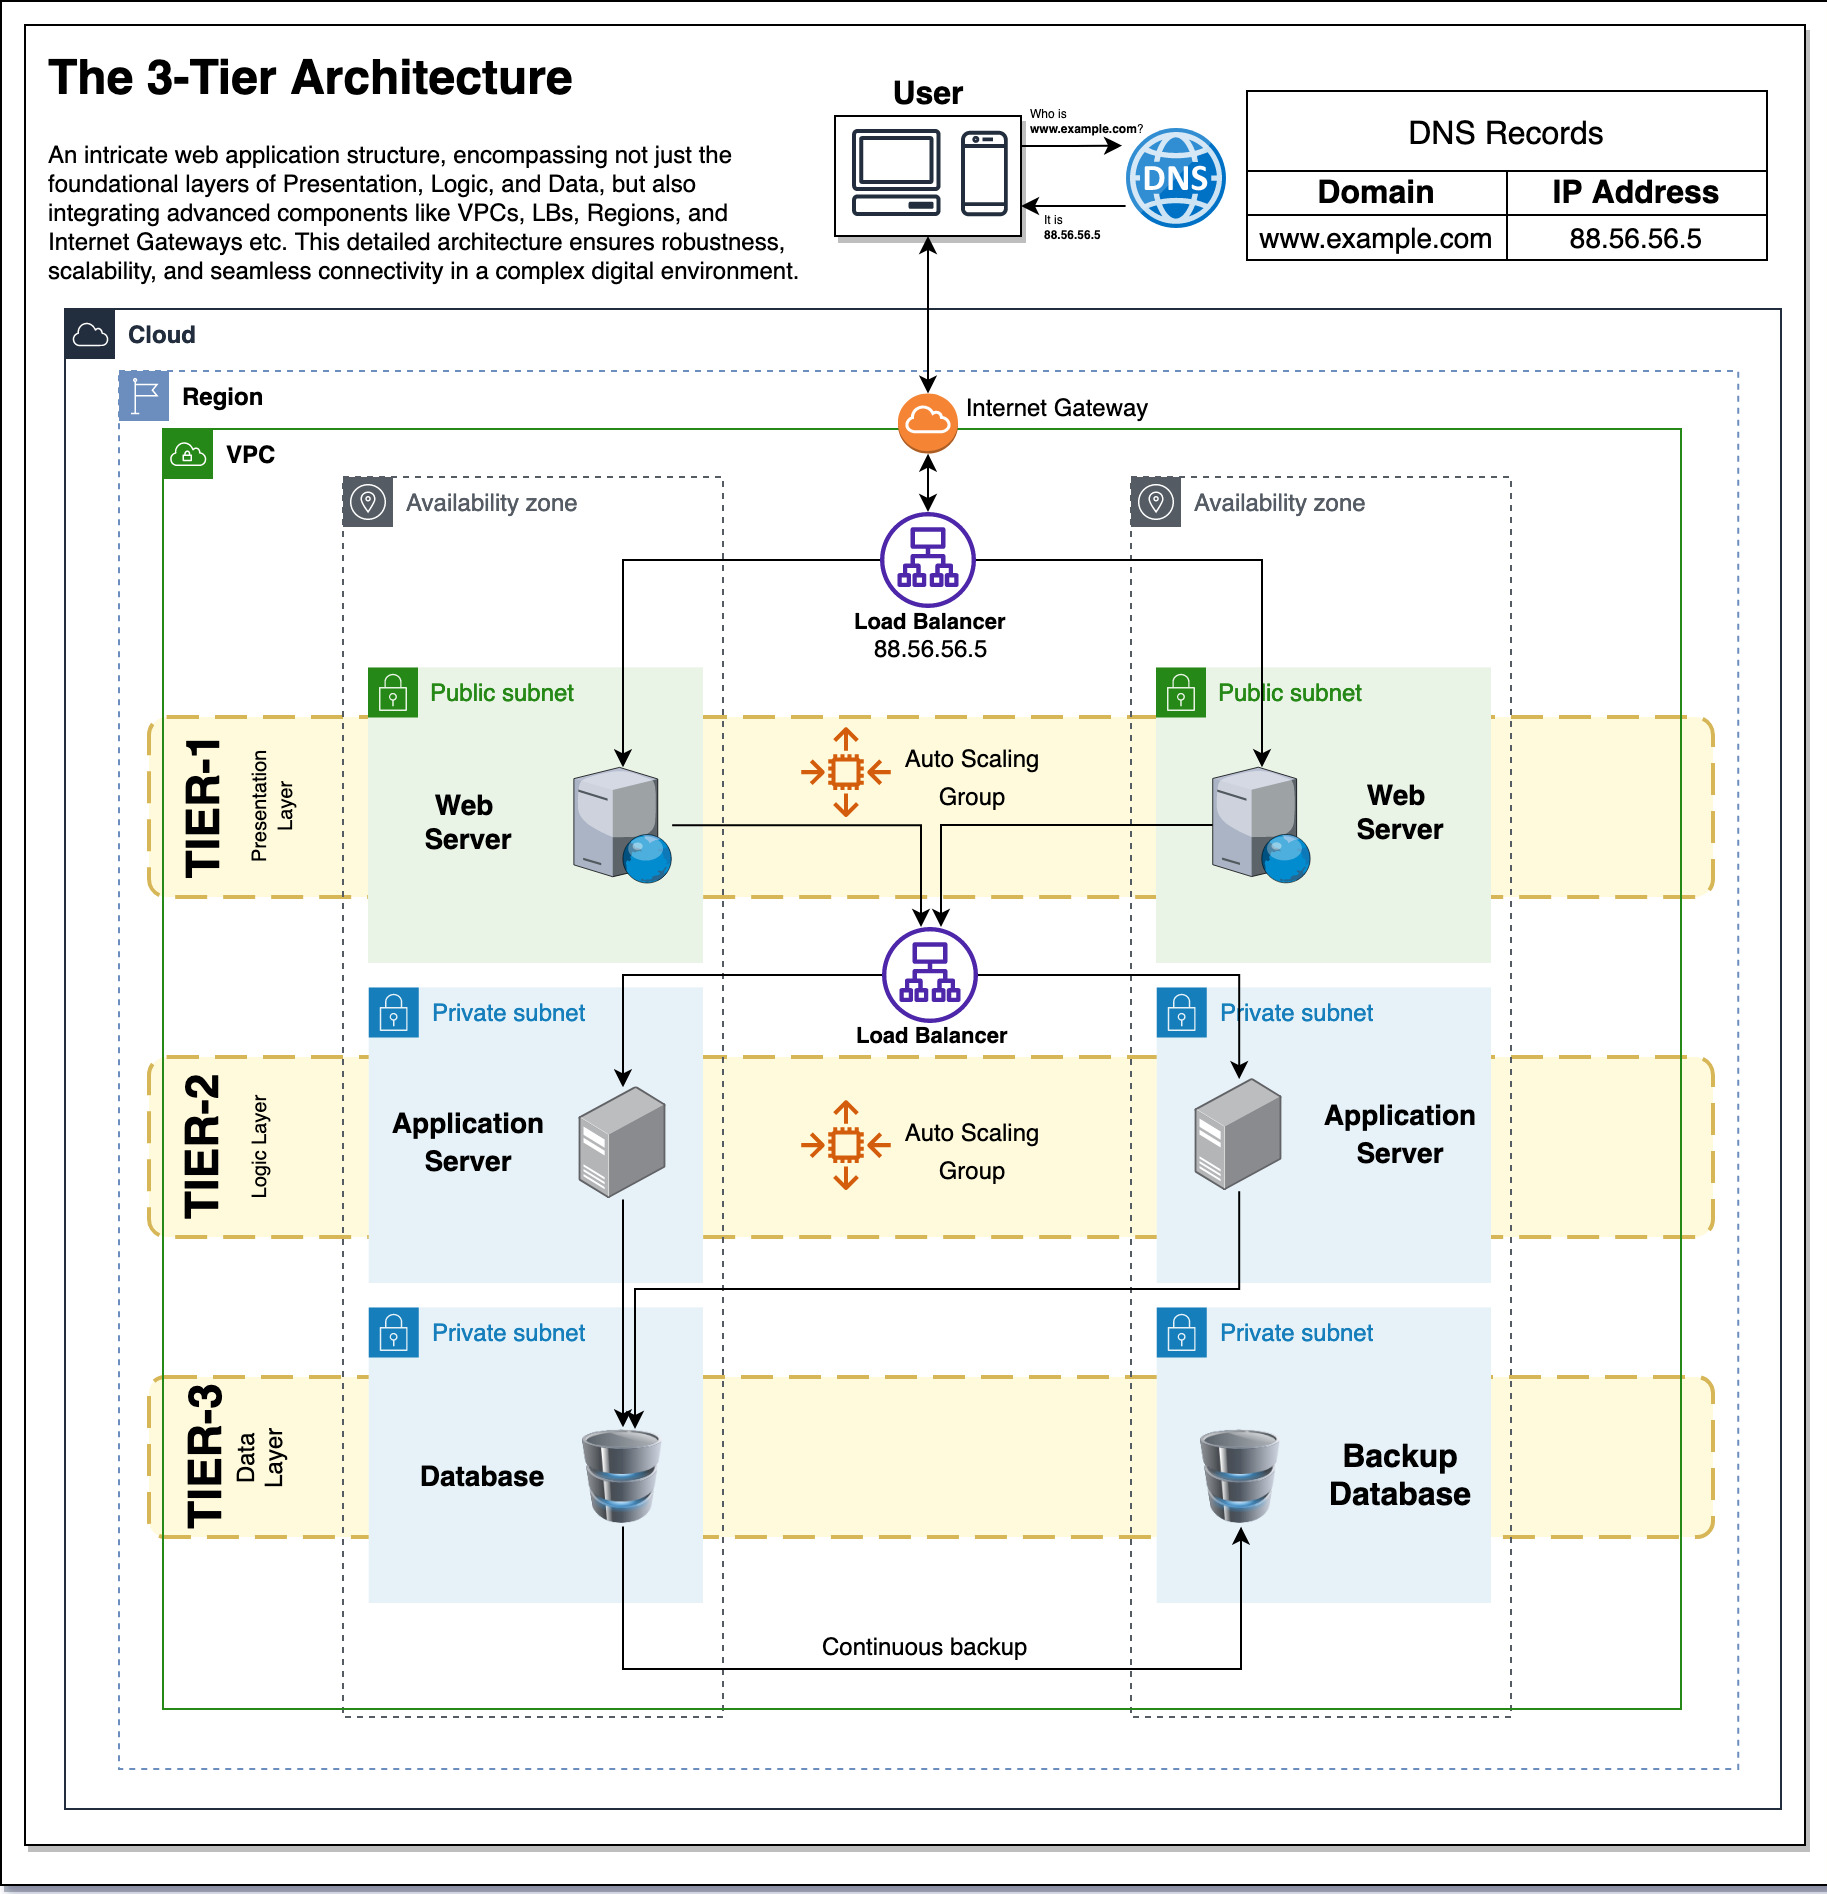 The 3-tier architecture of the system